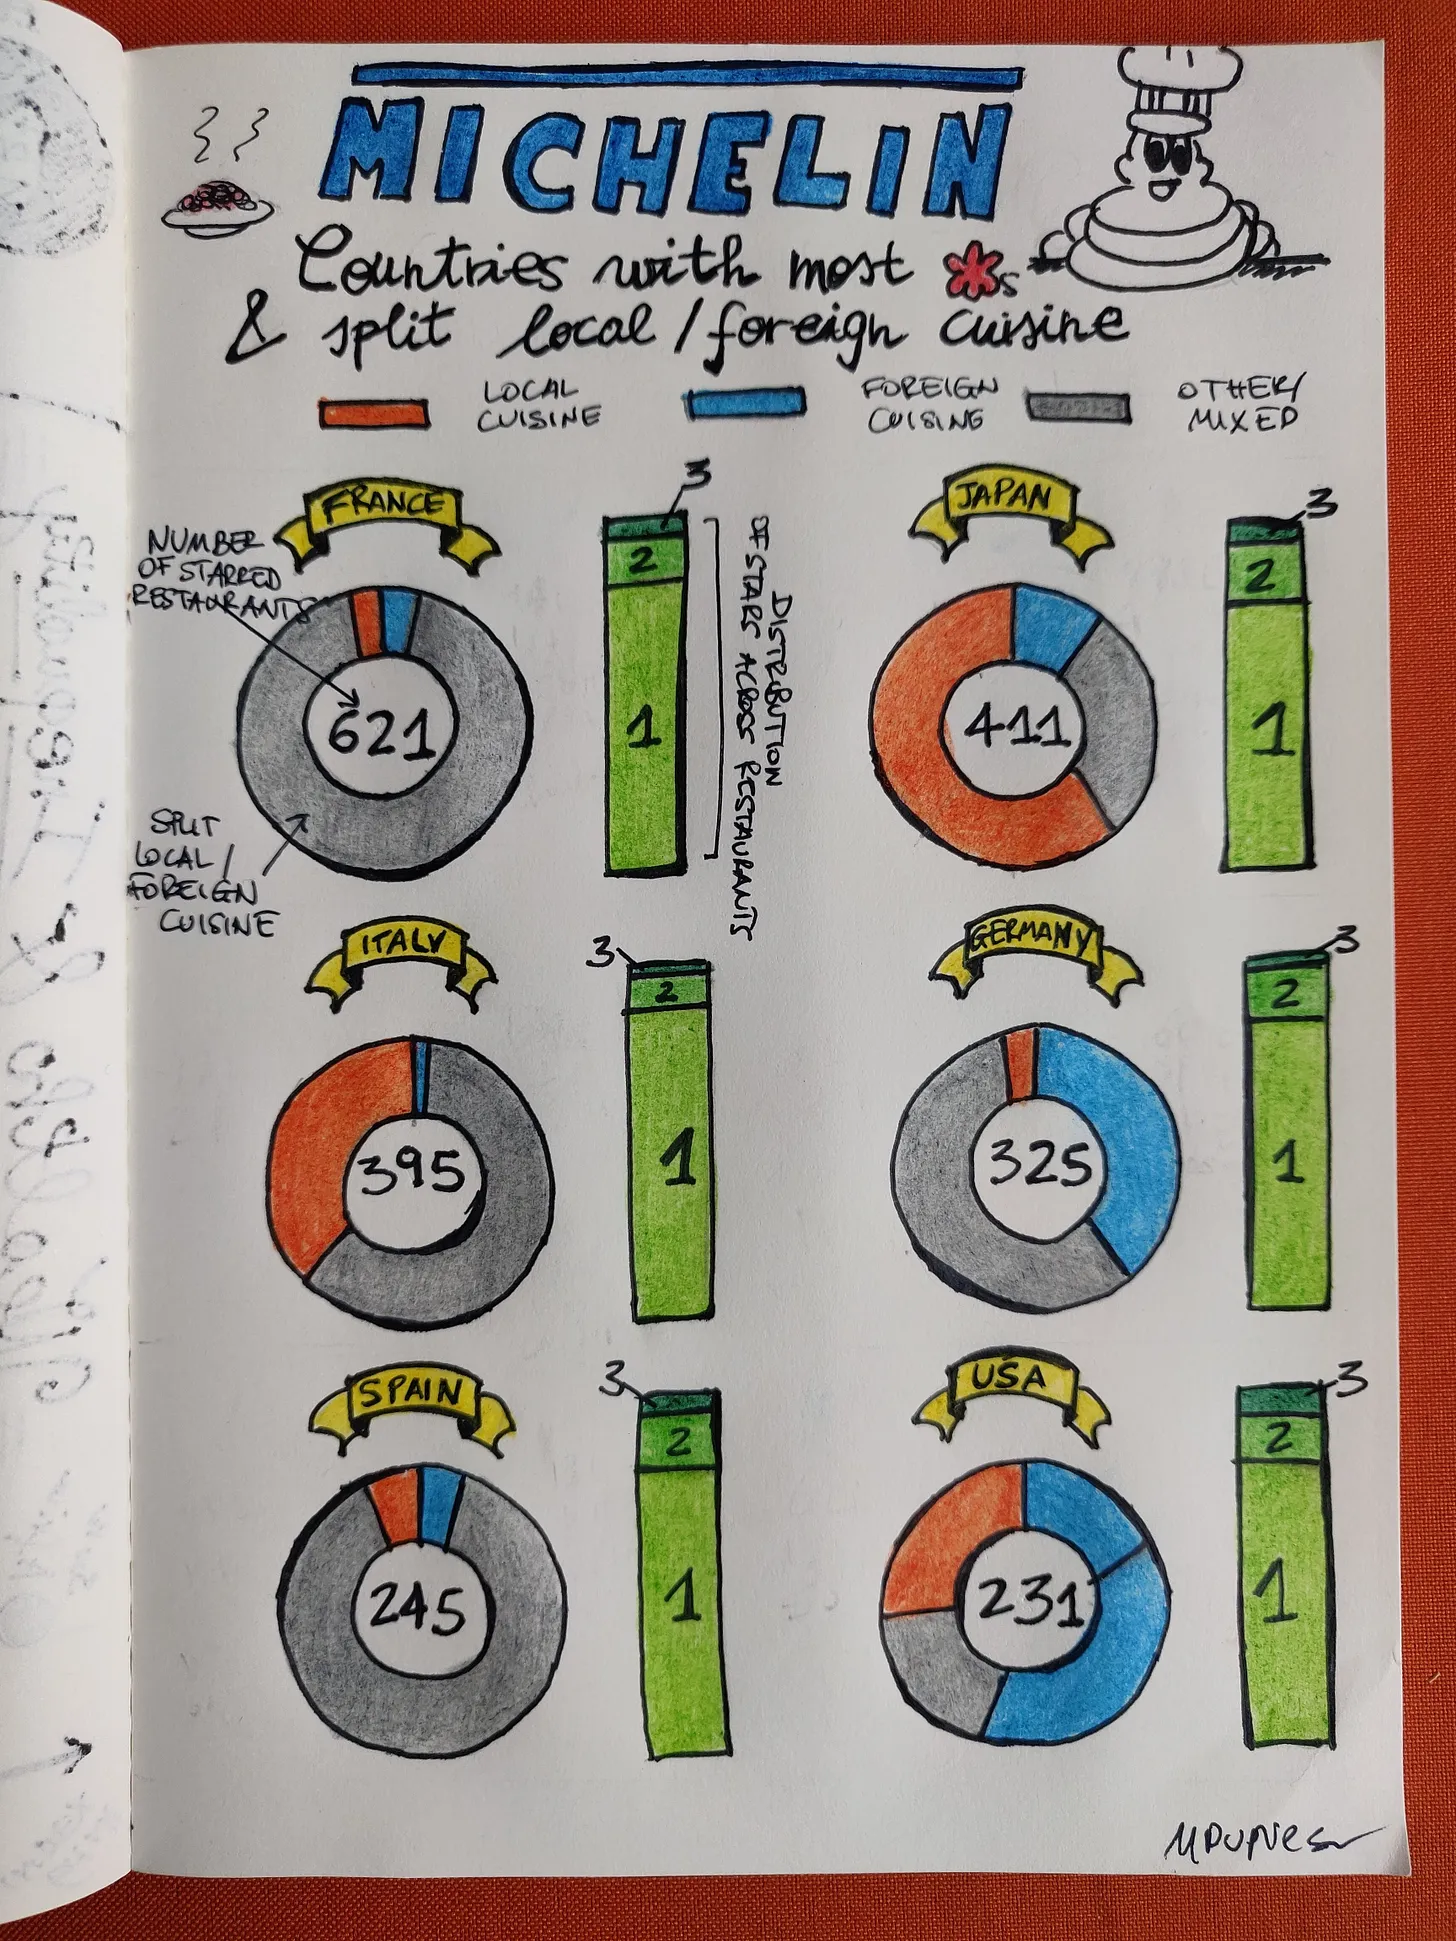 hand-drawn visualisation showing the number of Michelin-starred restaurants in the Micheling guide 2024. It also shows the distribution of stats per country and the split foreign/local cuisine.